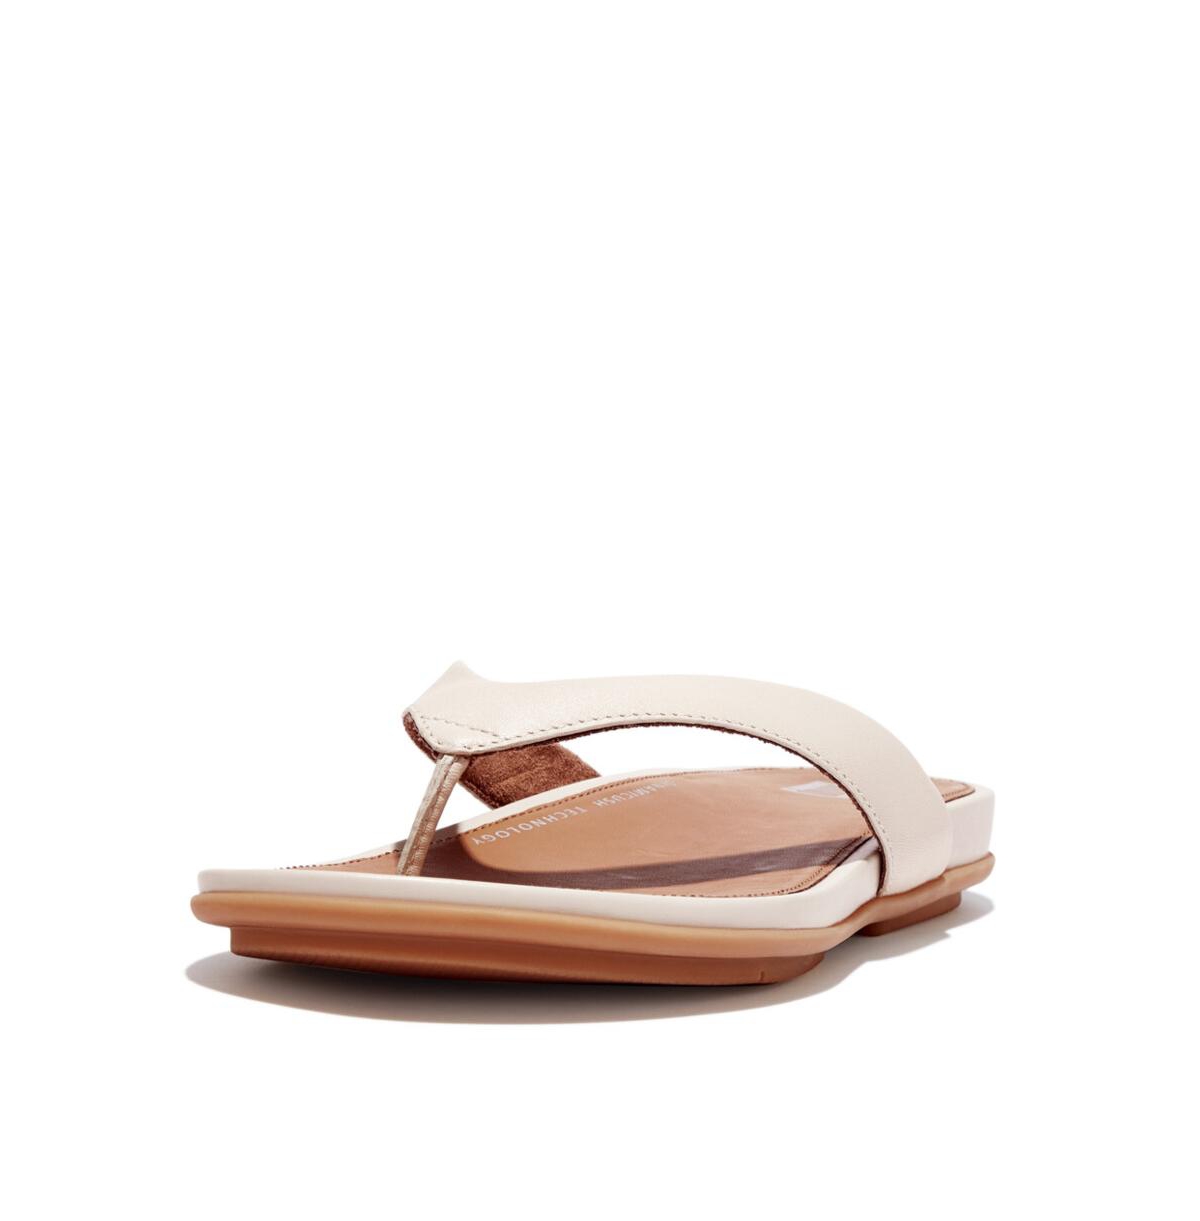 FitFlop Women's Gracie Toe-Thong Sandals Women's Shoes